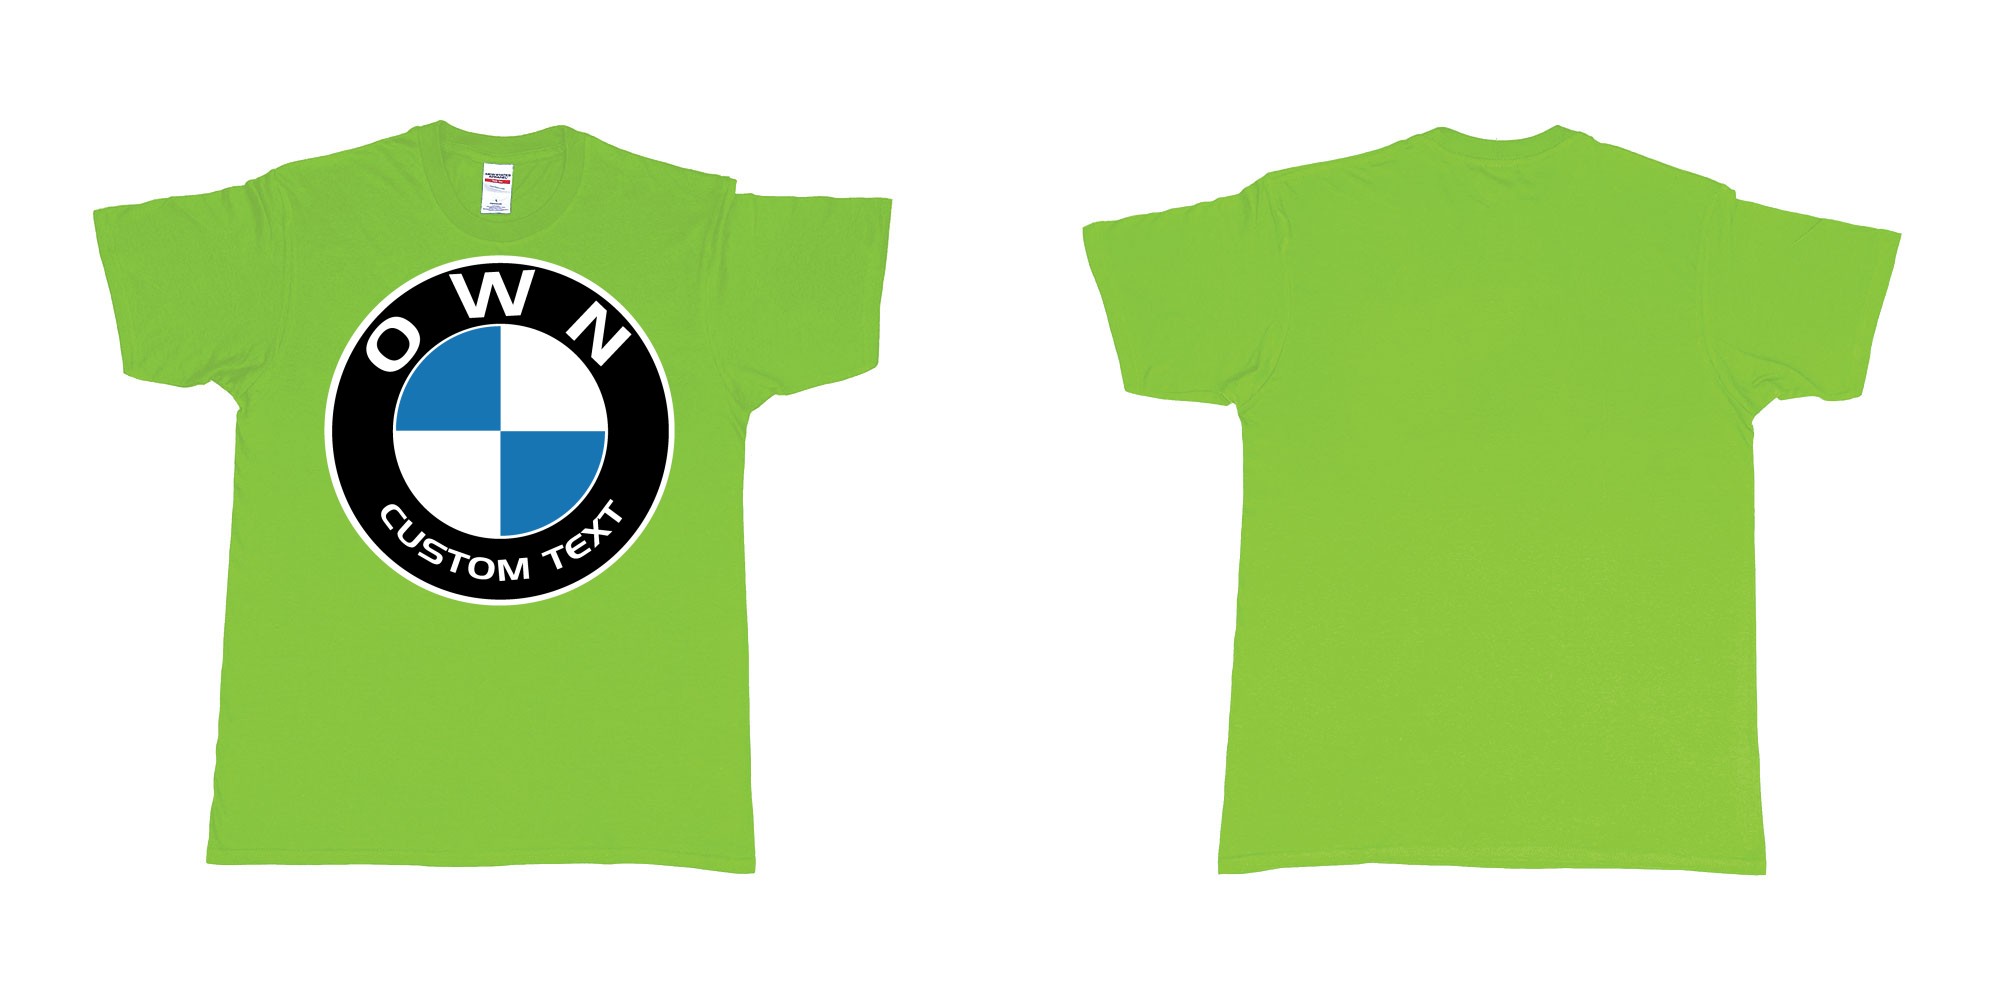 Custom tshirt design BMW logo custom text tshirt printing in fabric color lime choice your own text made in Bali by The Pirate Way